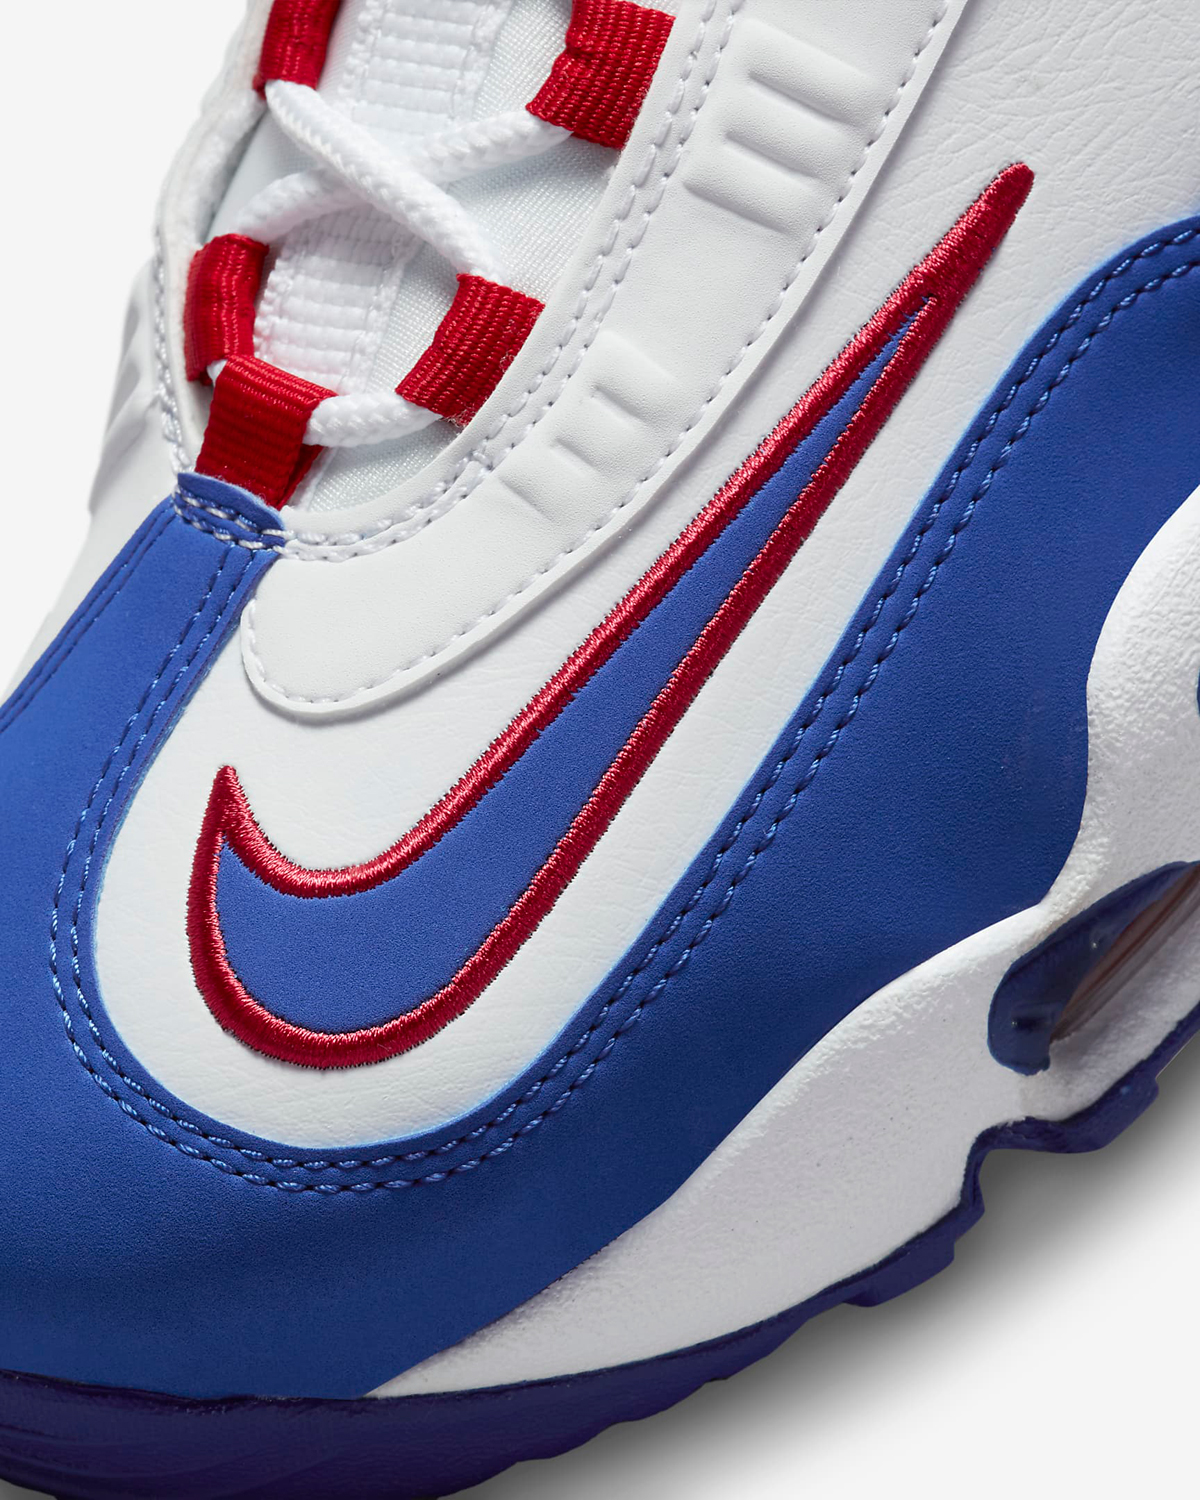 nike-air-griffey-max-1-usa-release-date-7